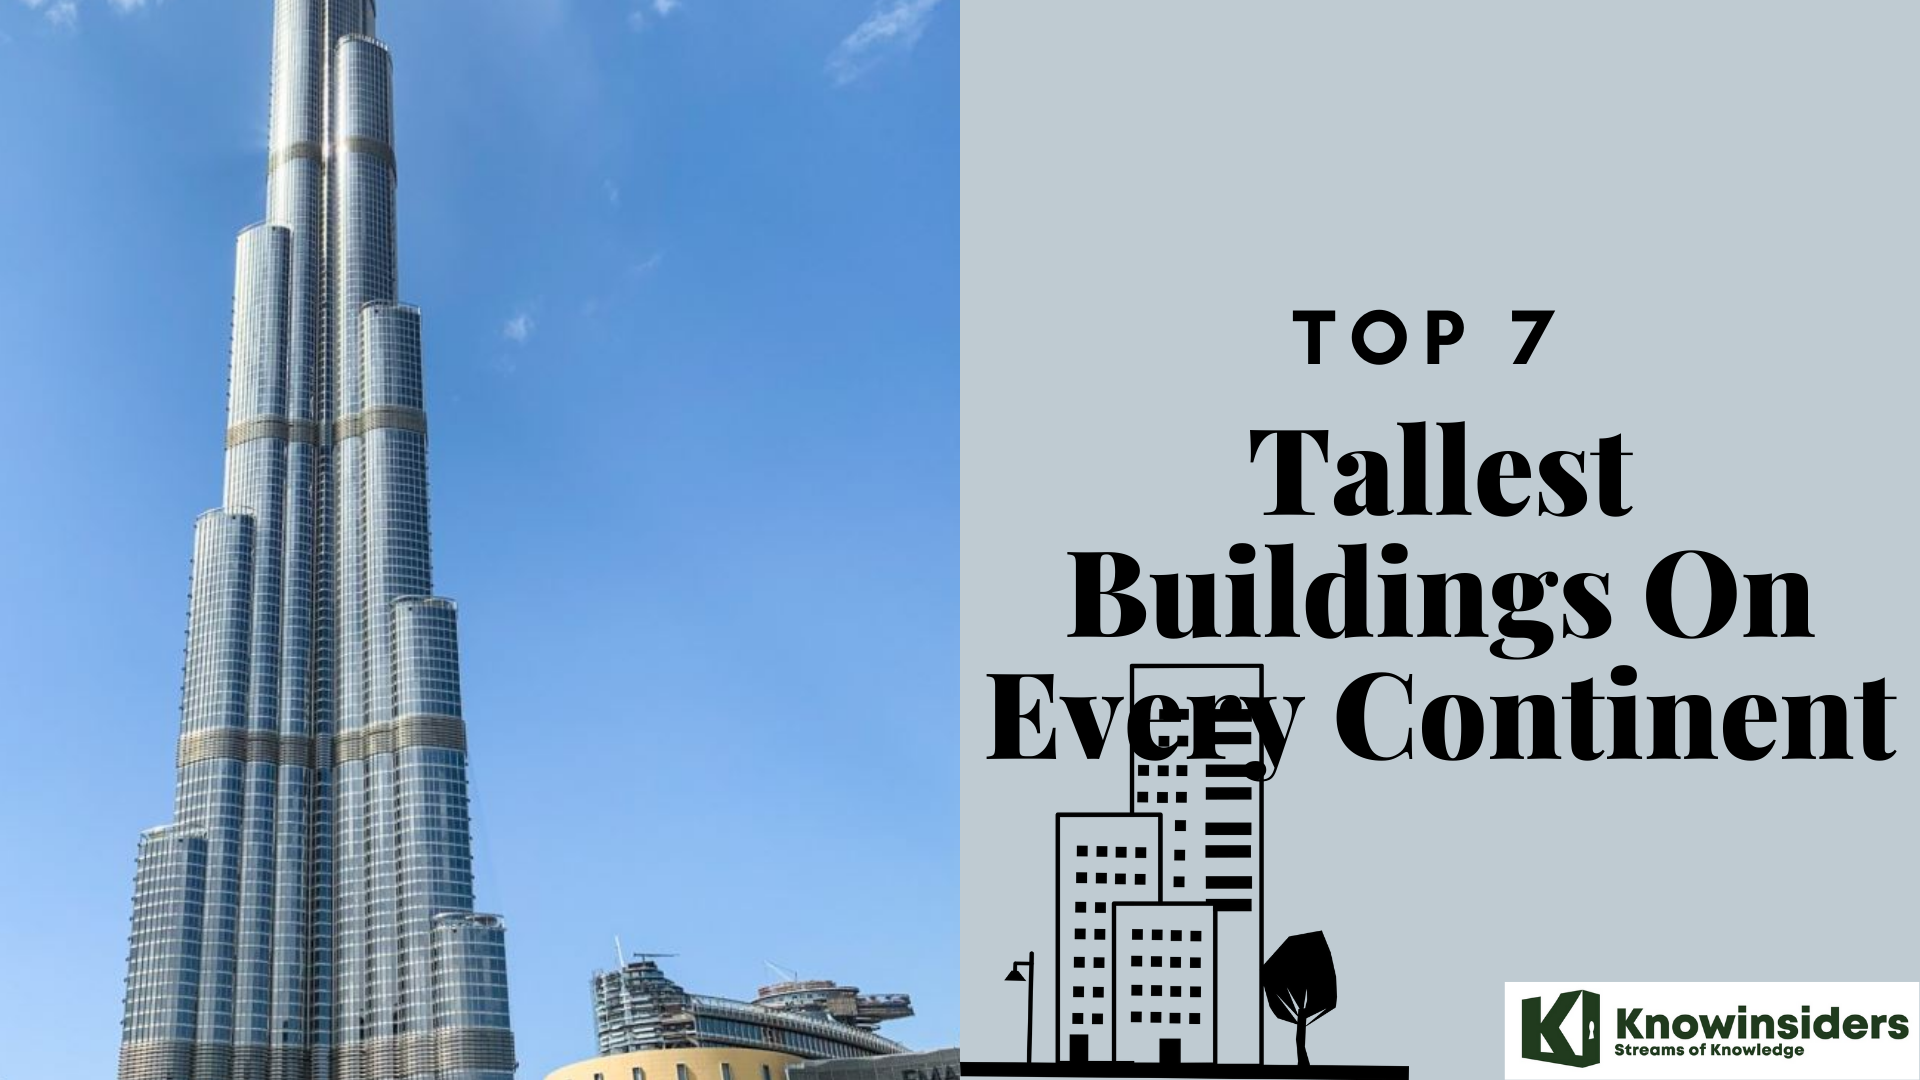 Top Tallest Buildings in 7 Continents Right Now